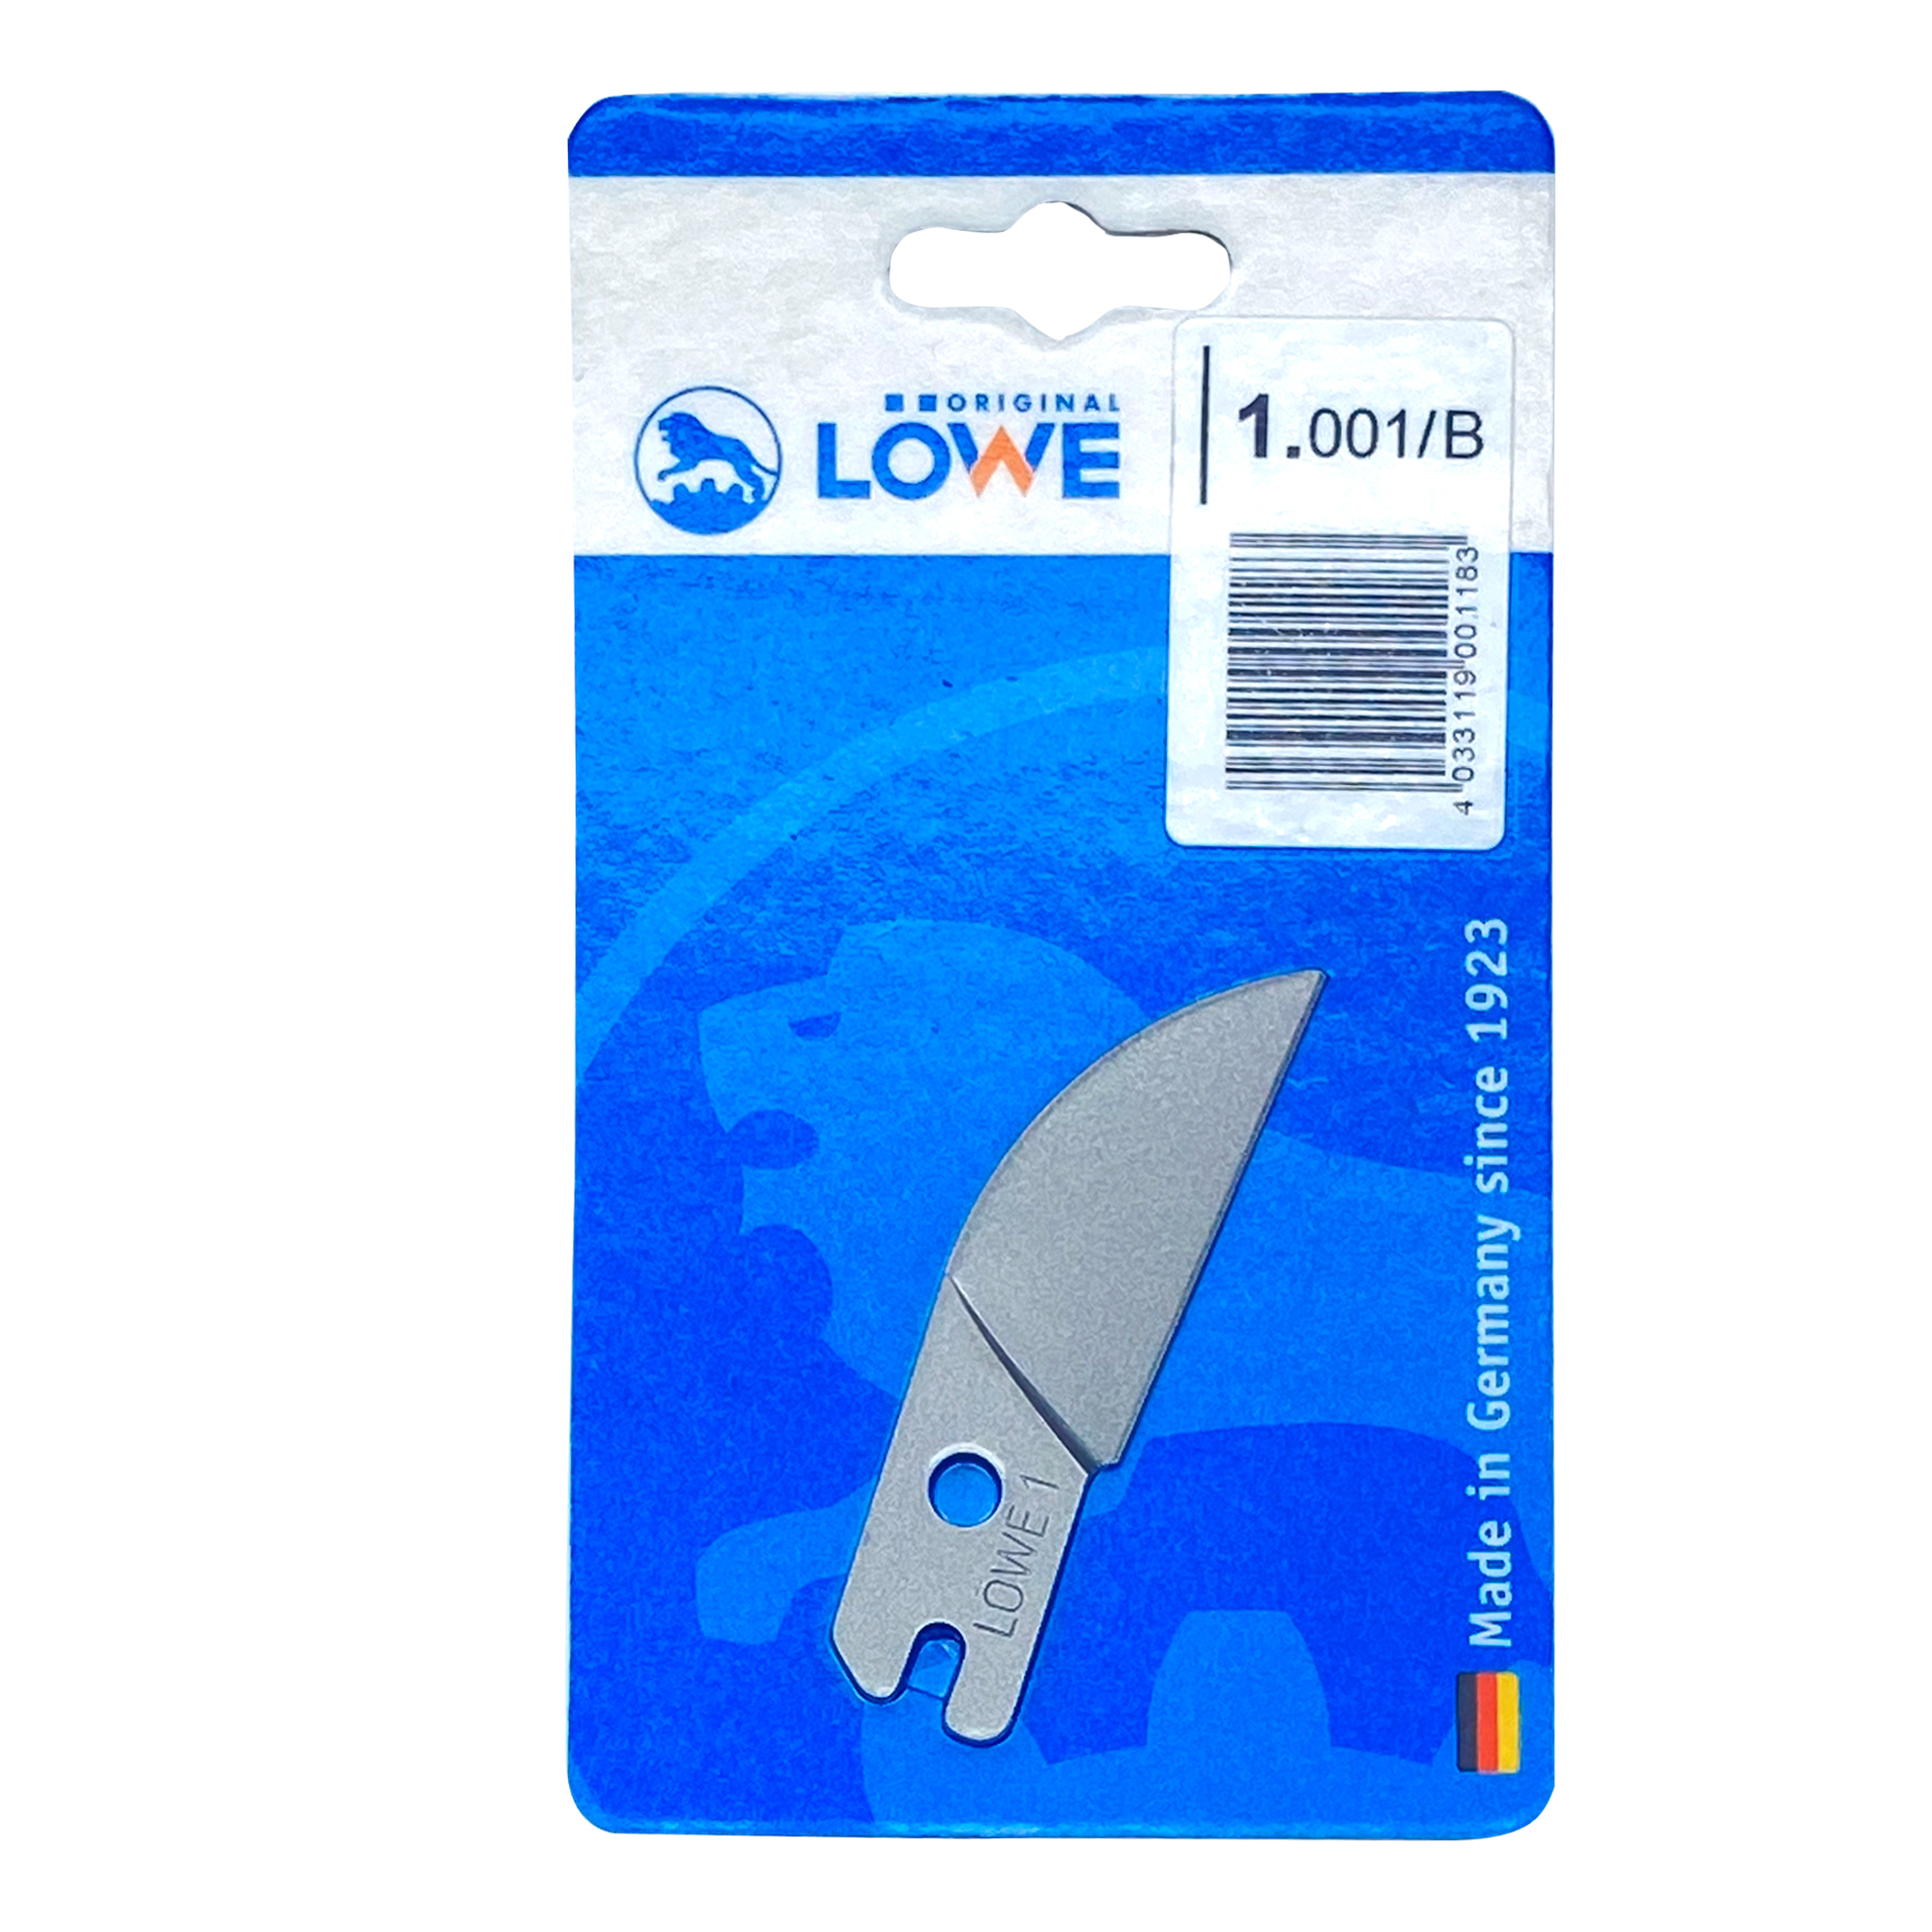 Blade LÖWE 1, 1 piece in blister pack